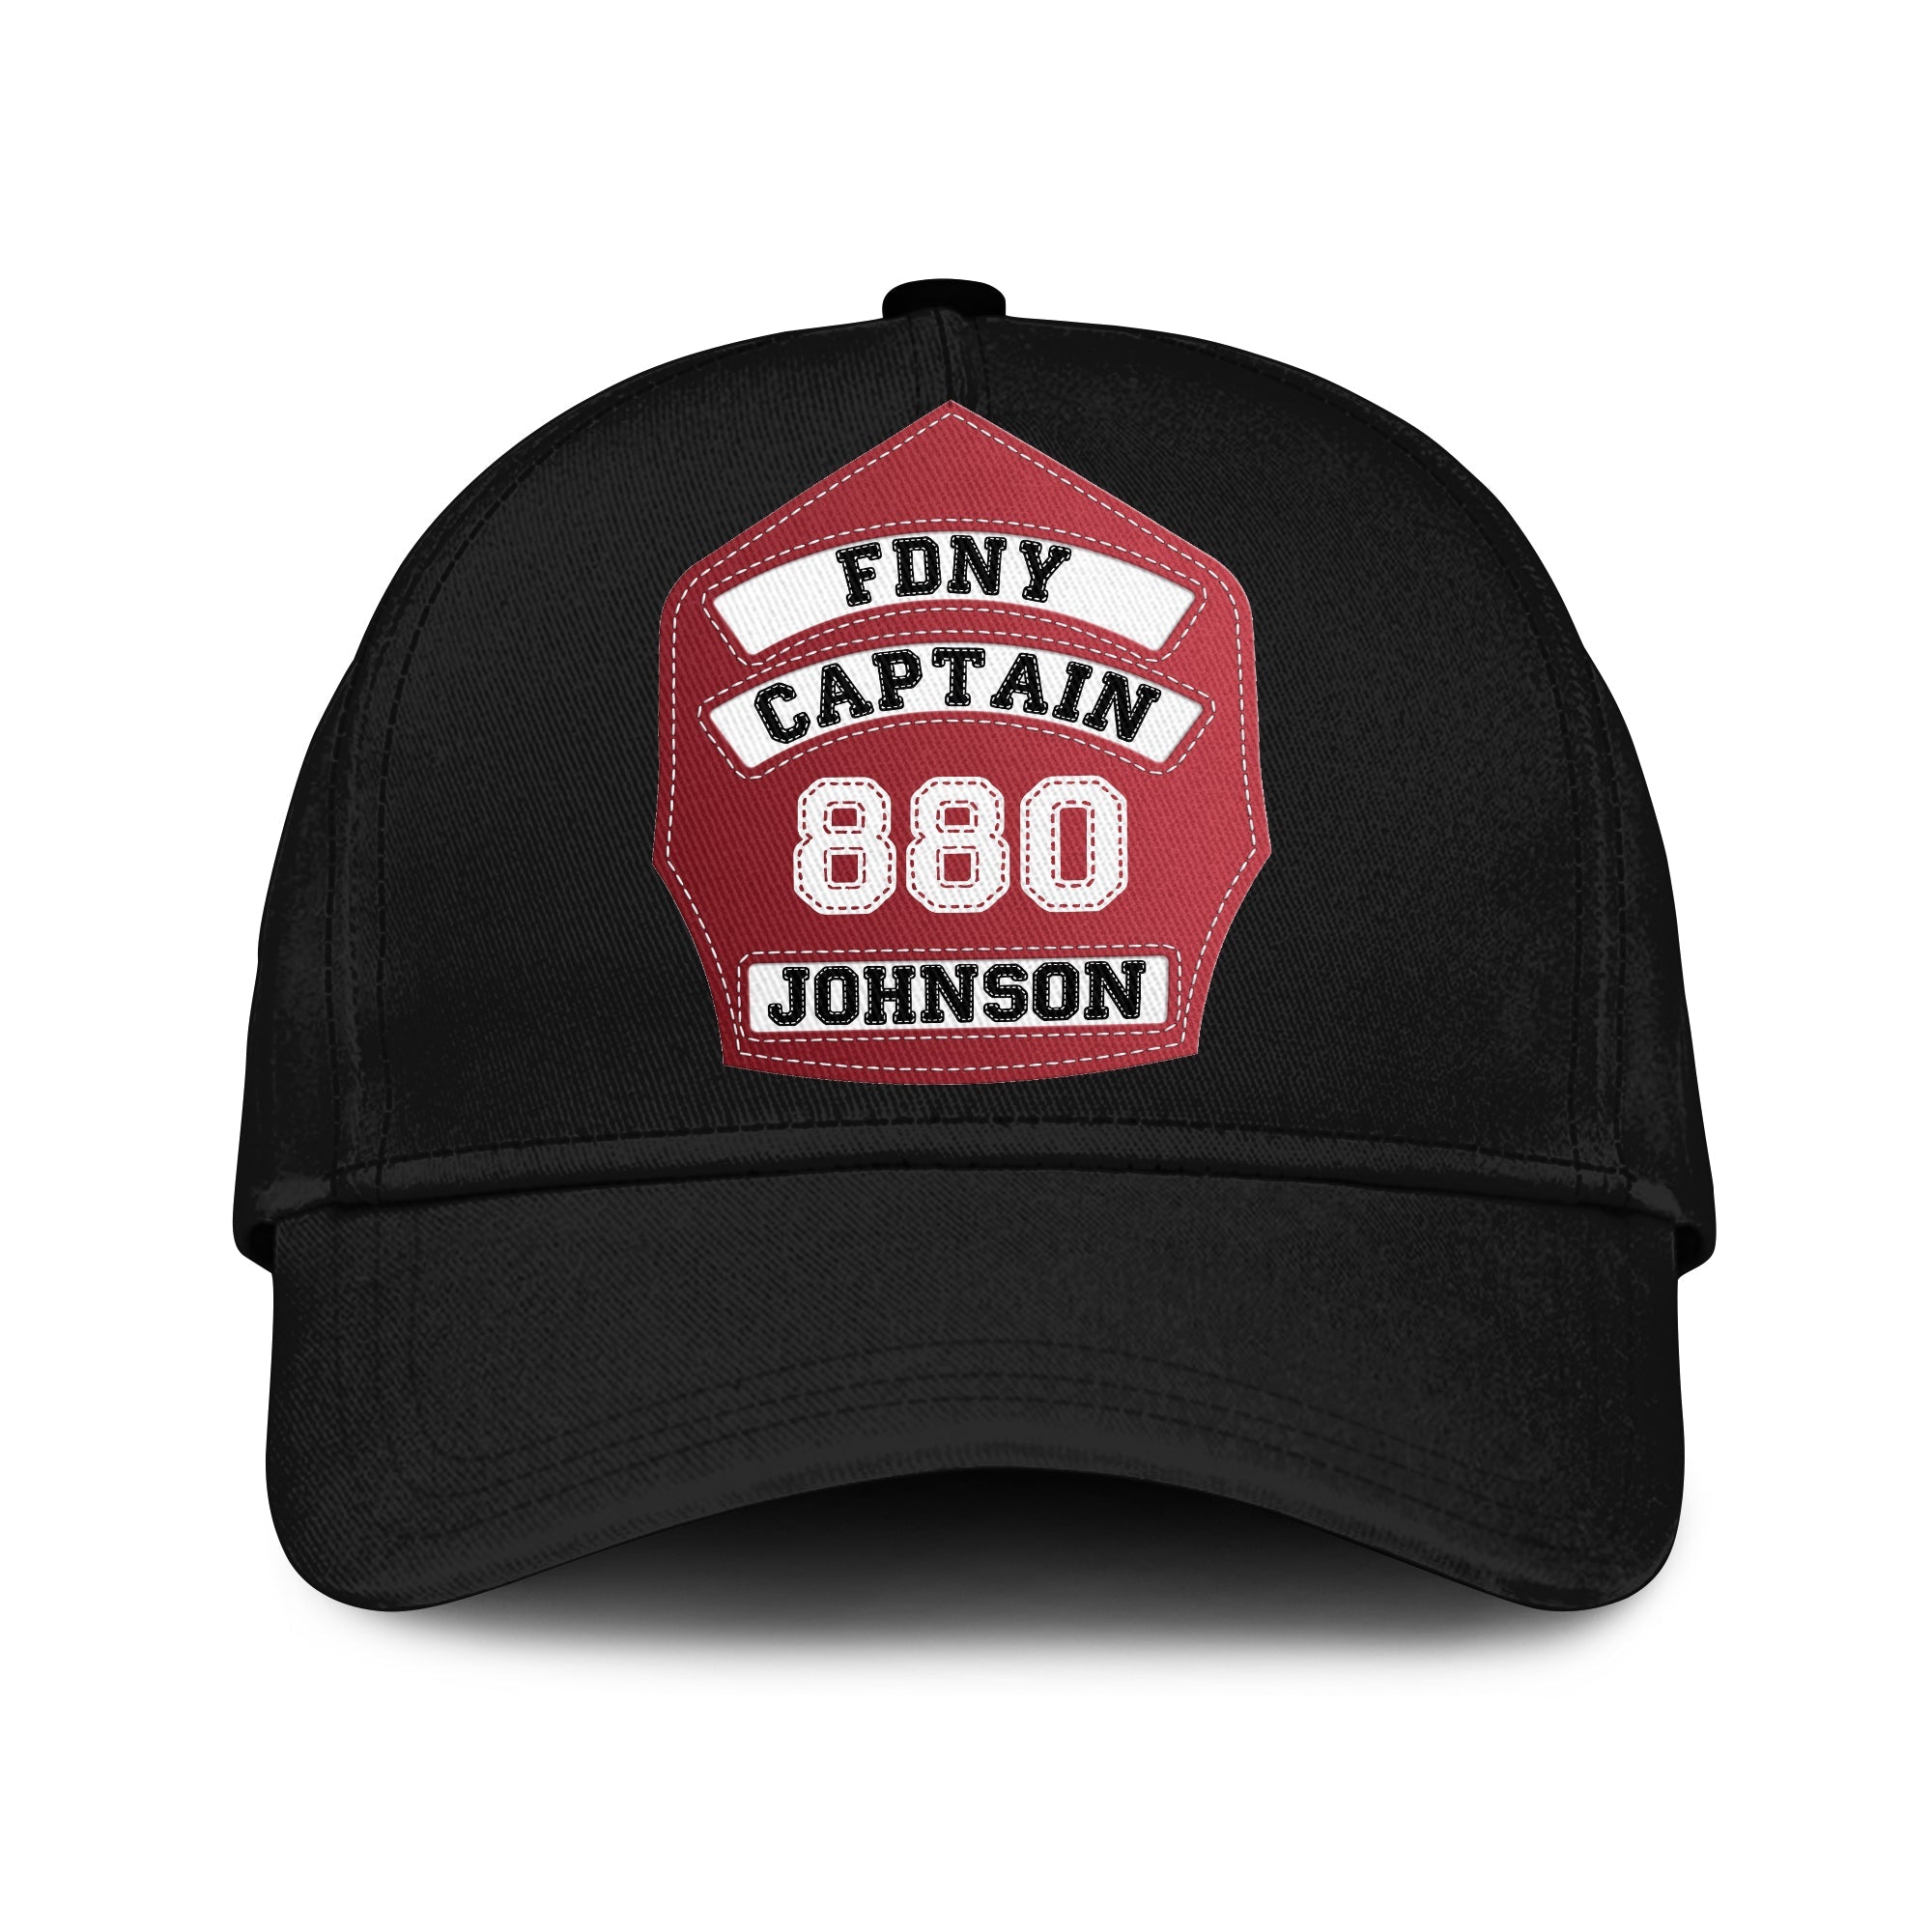 Firefighter’s Helmet Front Shield Personalized Classic Cap